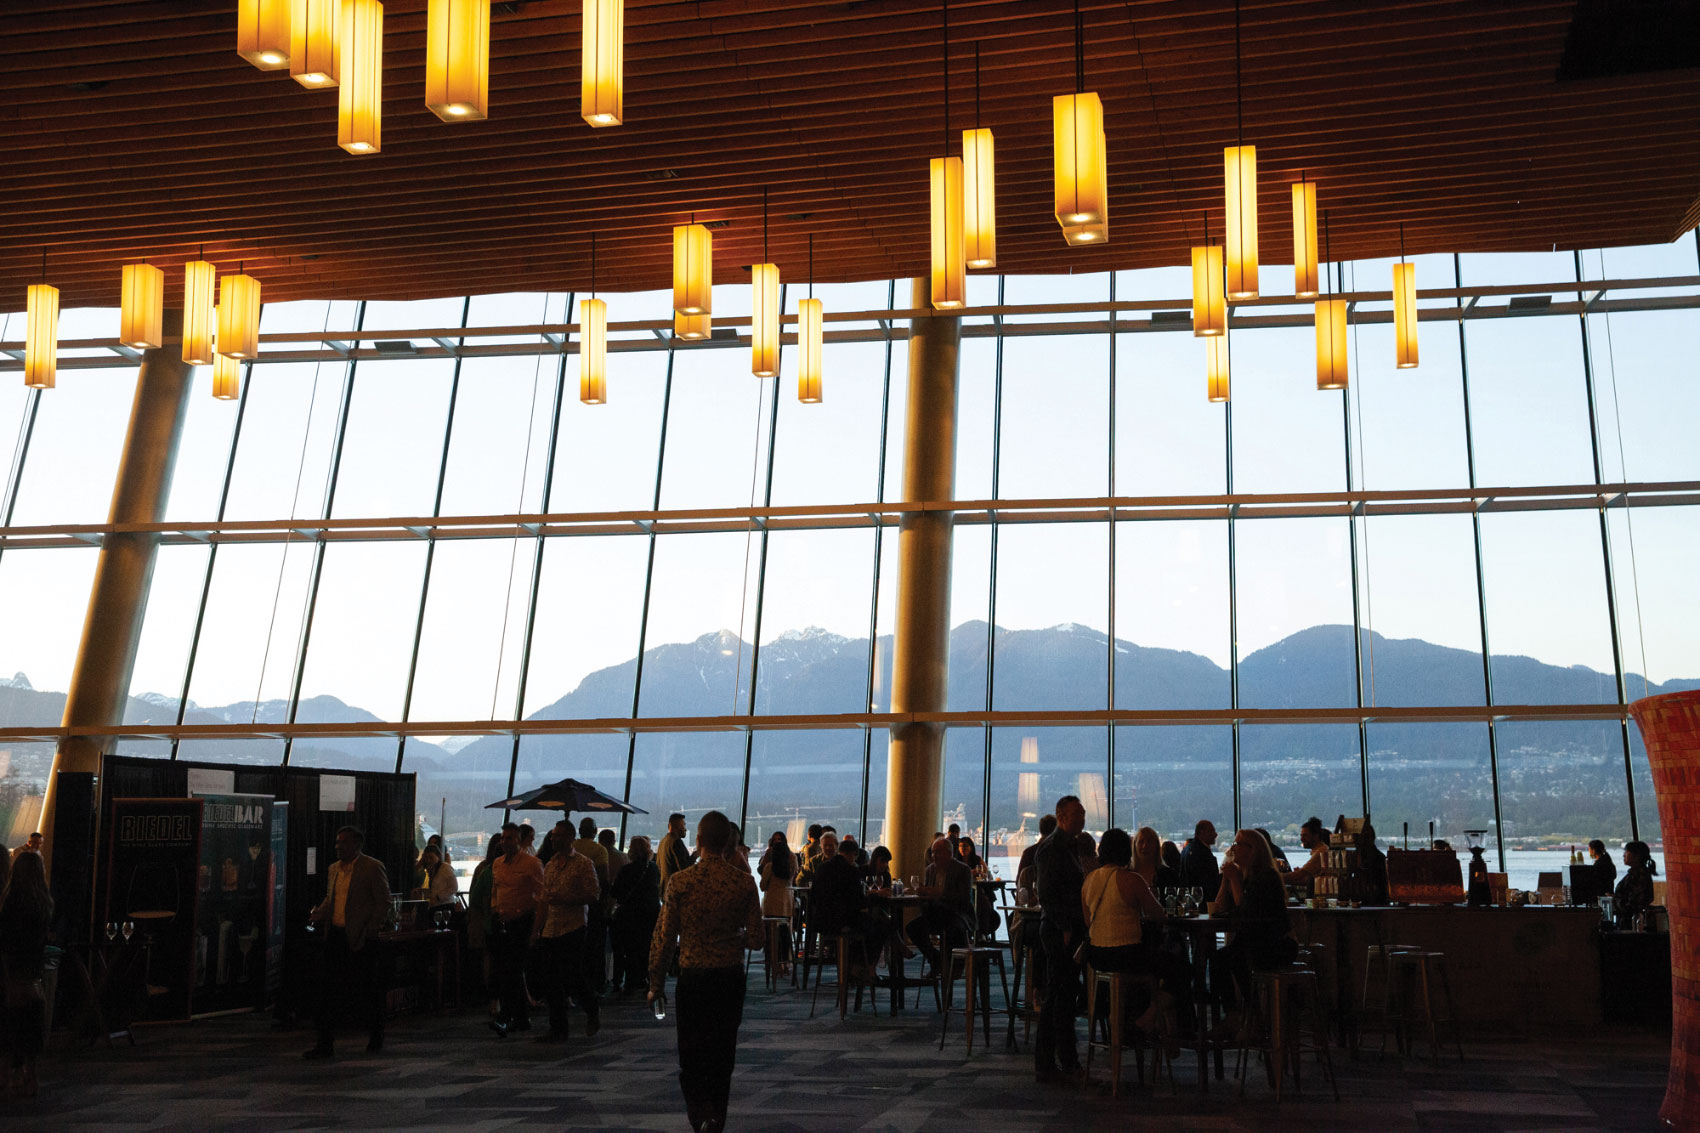 Inside convention room with floor-to-ceiling windows with view of mountains